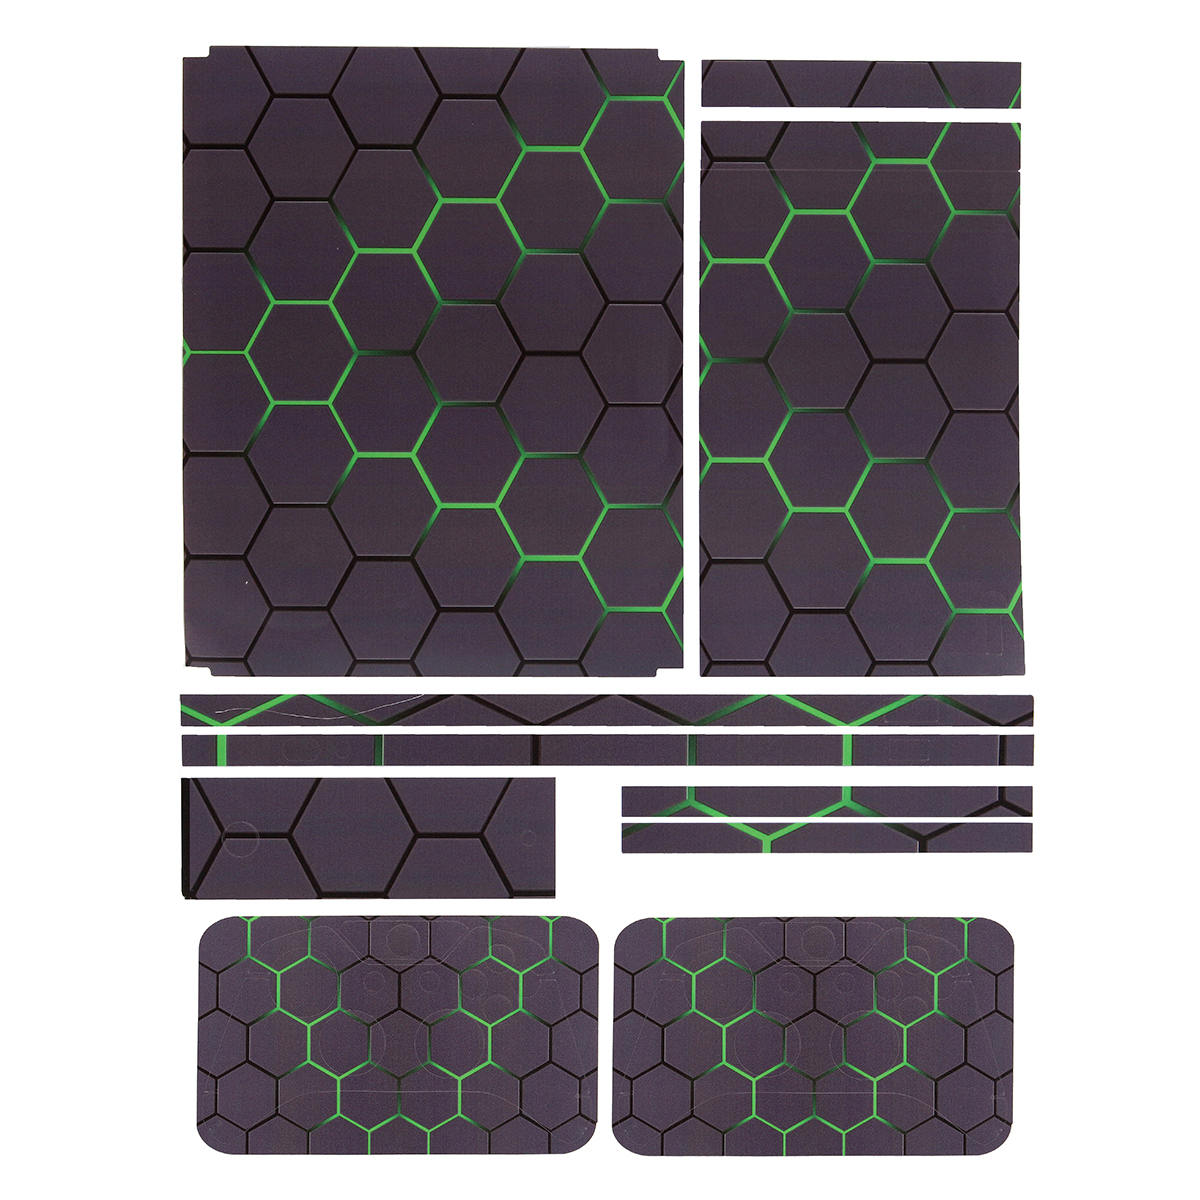 Green Grid Vinyl Decal Skin Stickers Cover for Xbox One S Game Console&2 Controllers 31